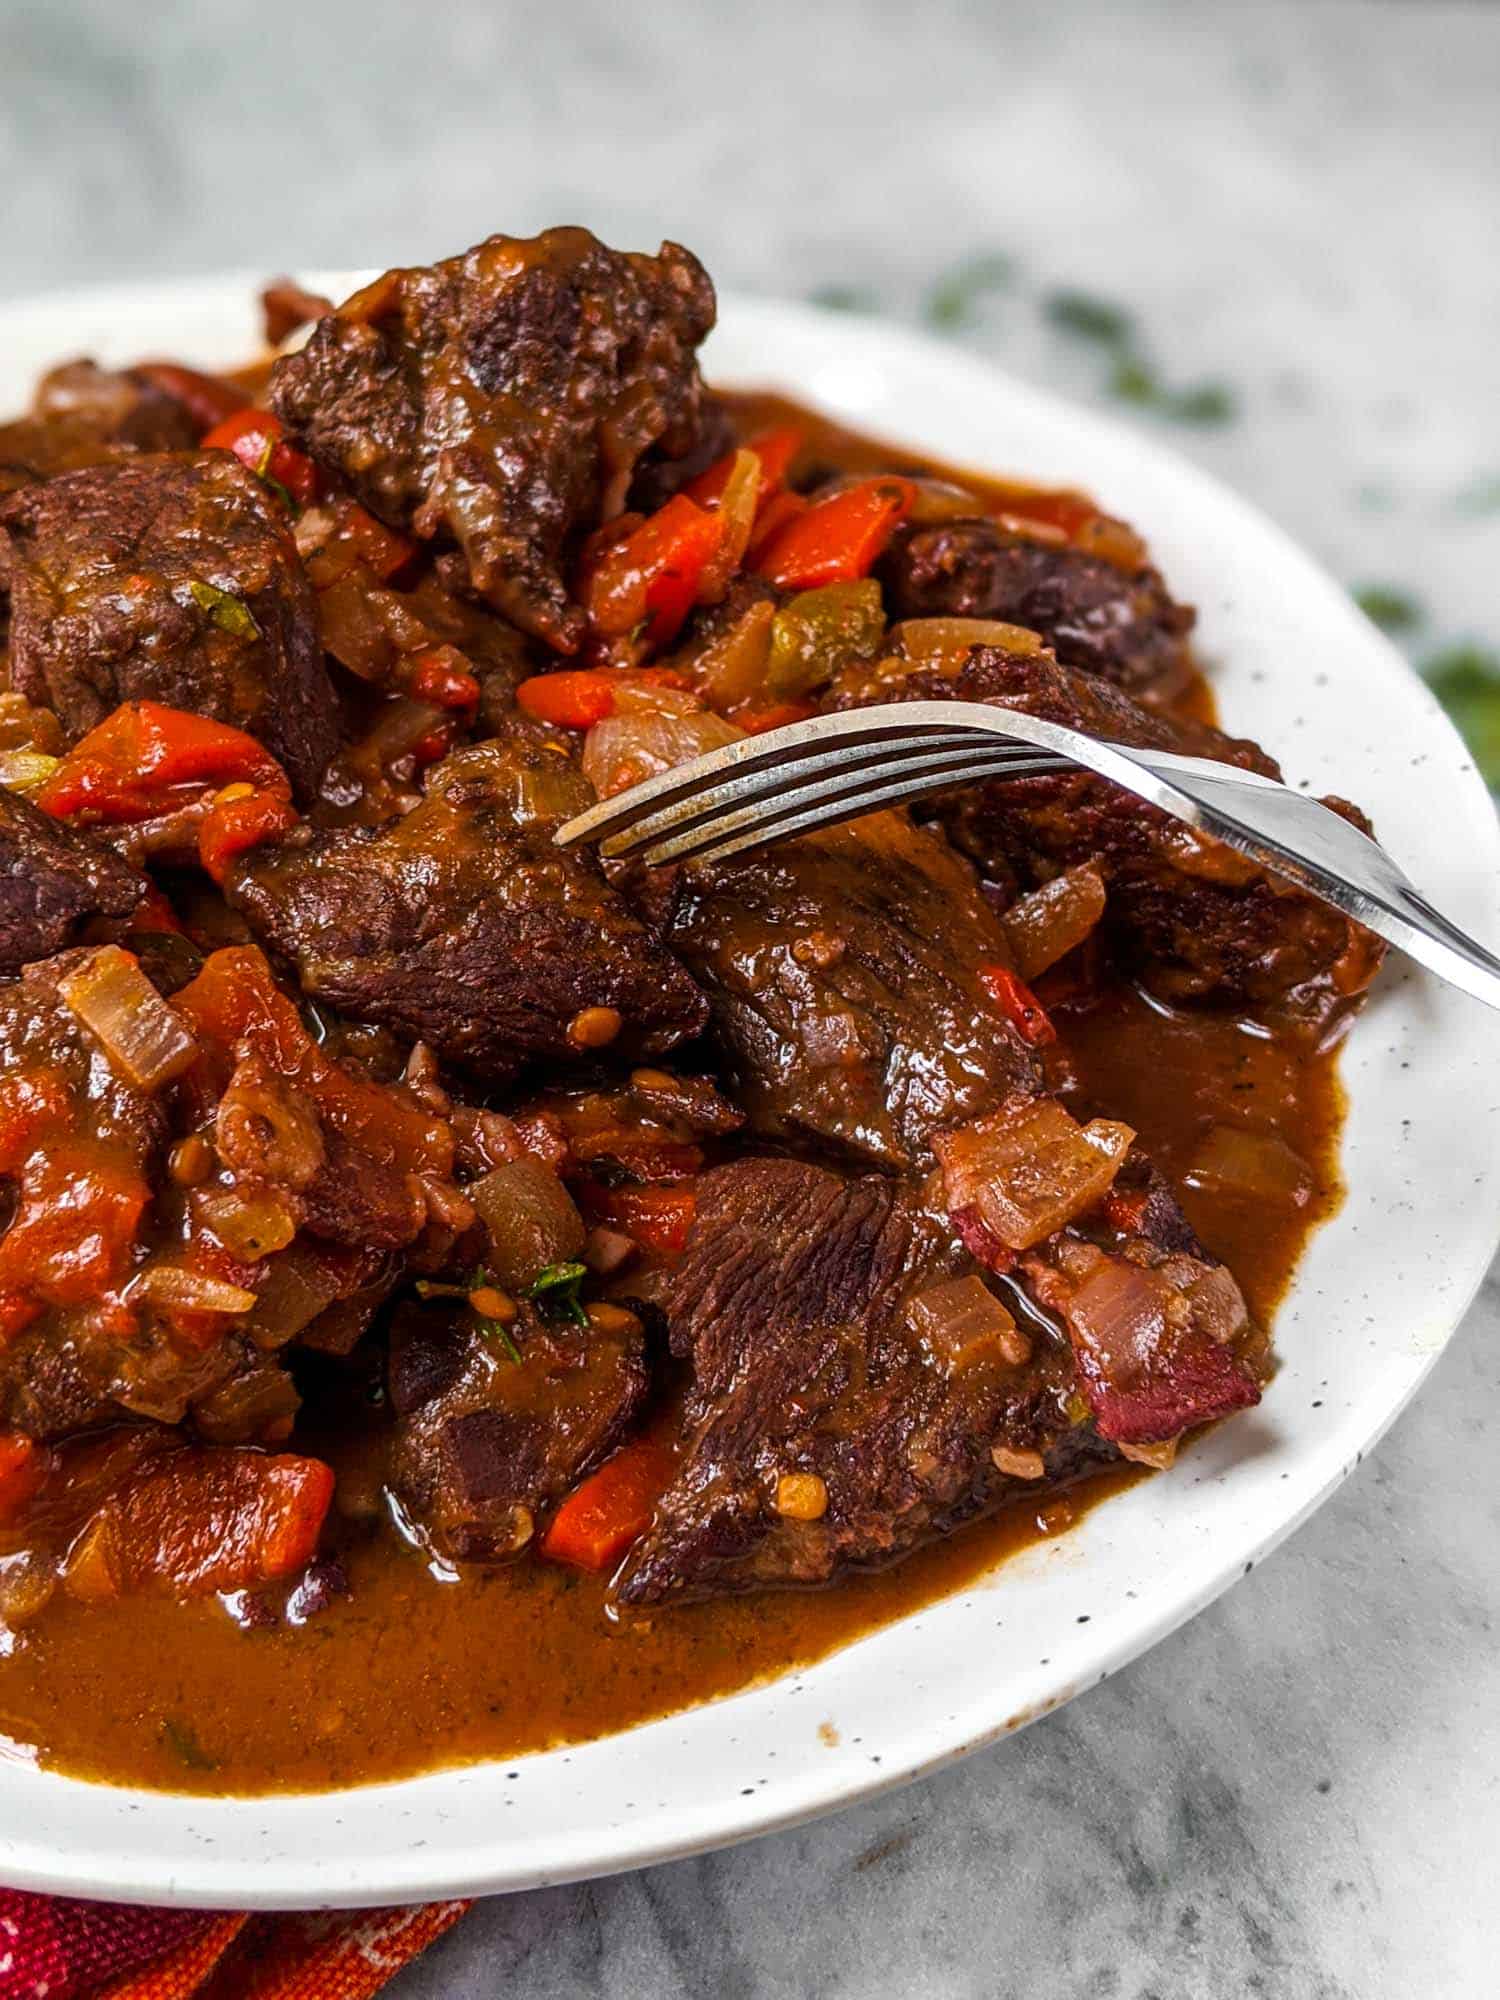 Spanish beef stew with roasted red peppers on a white plate with a fork.